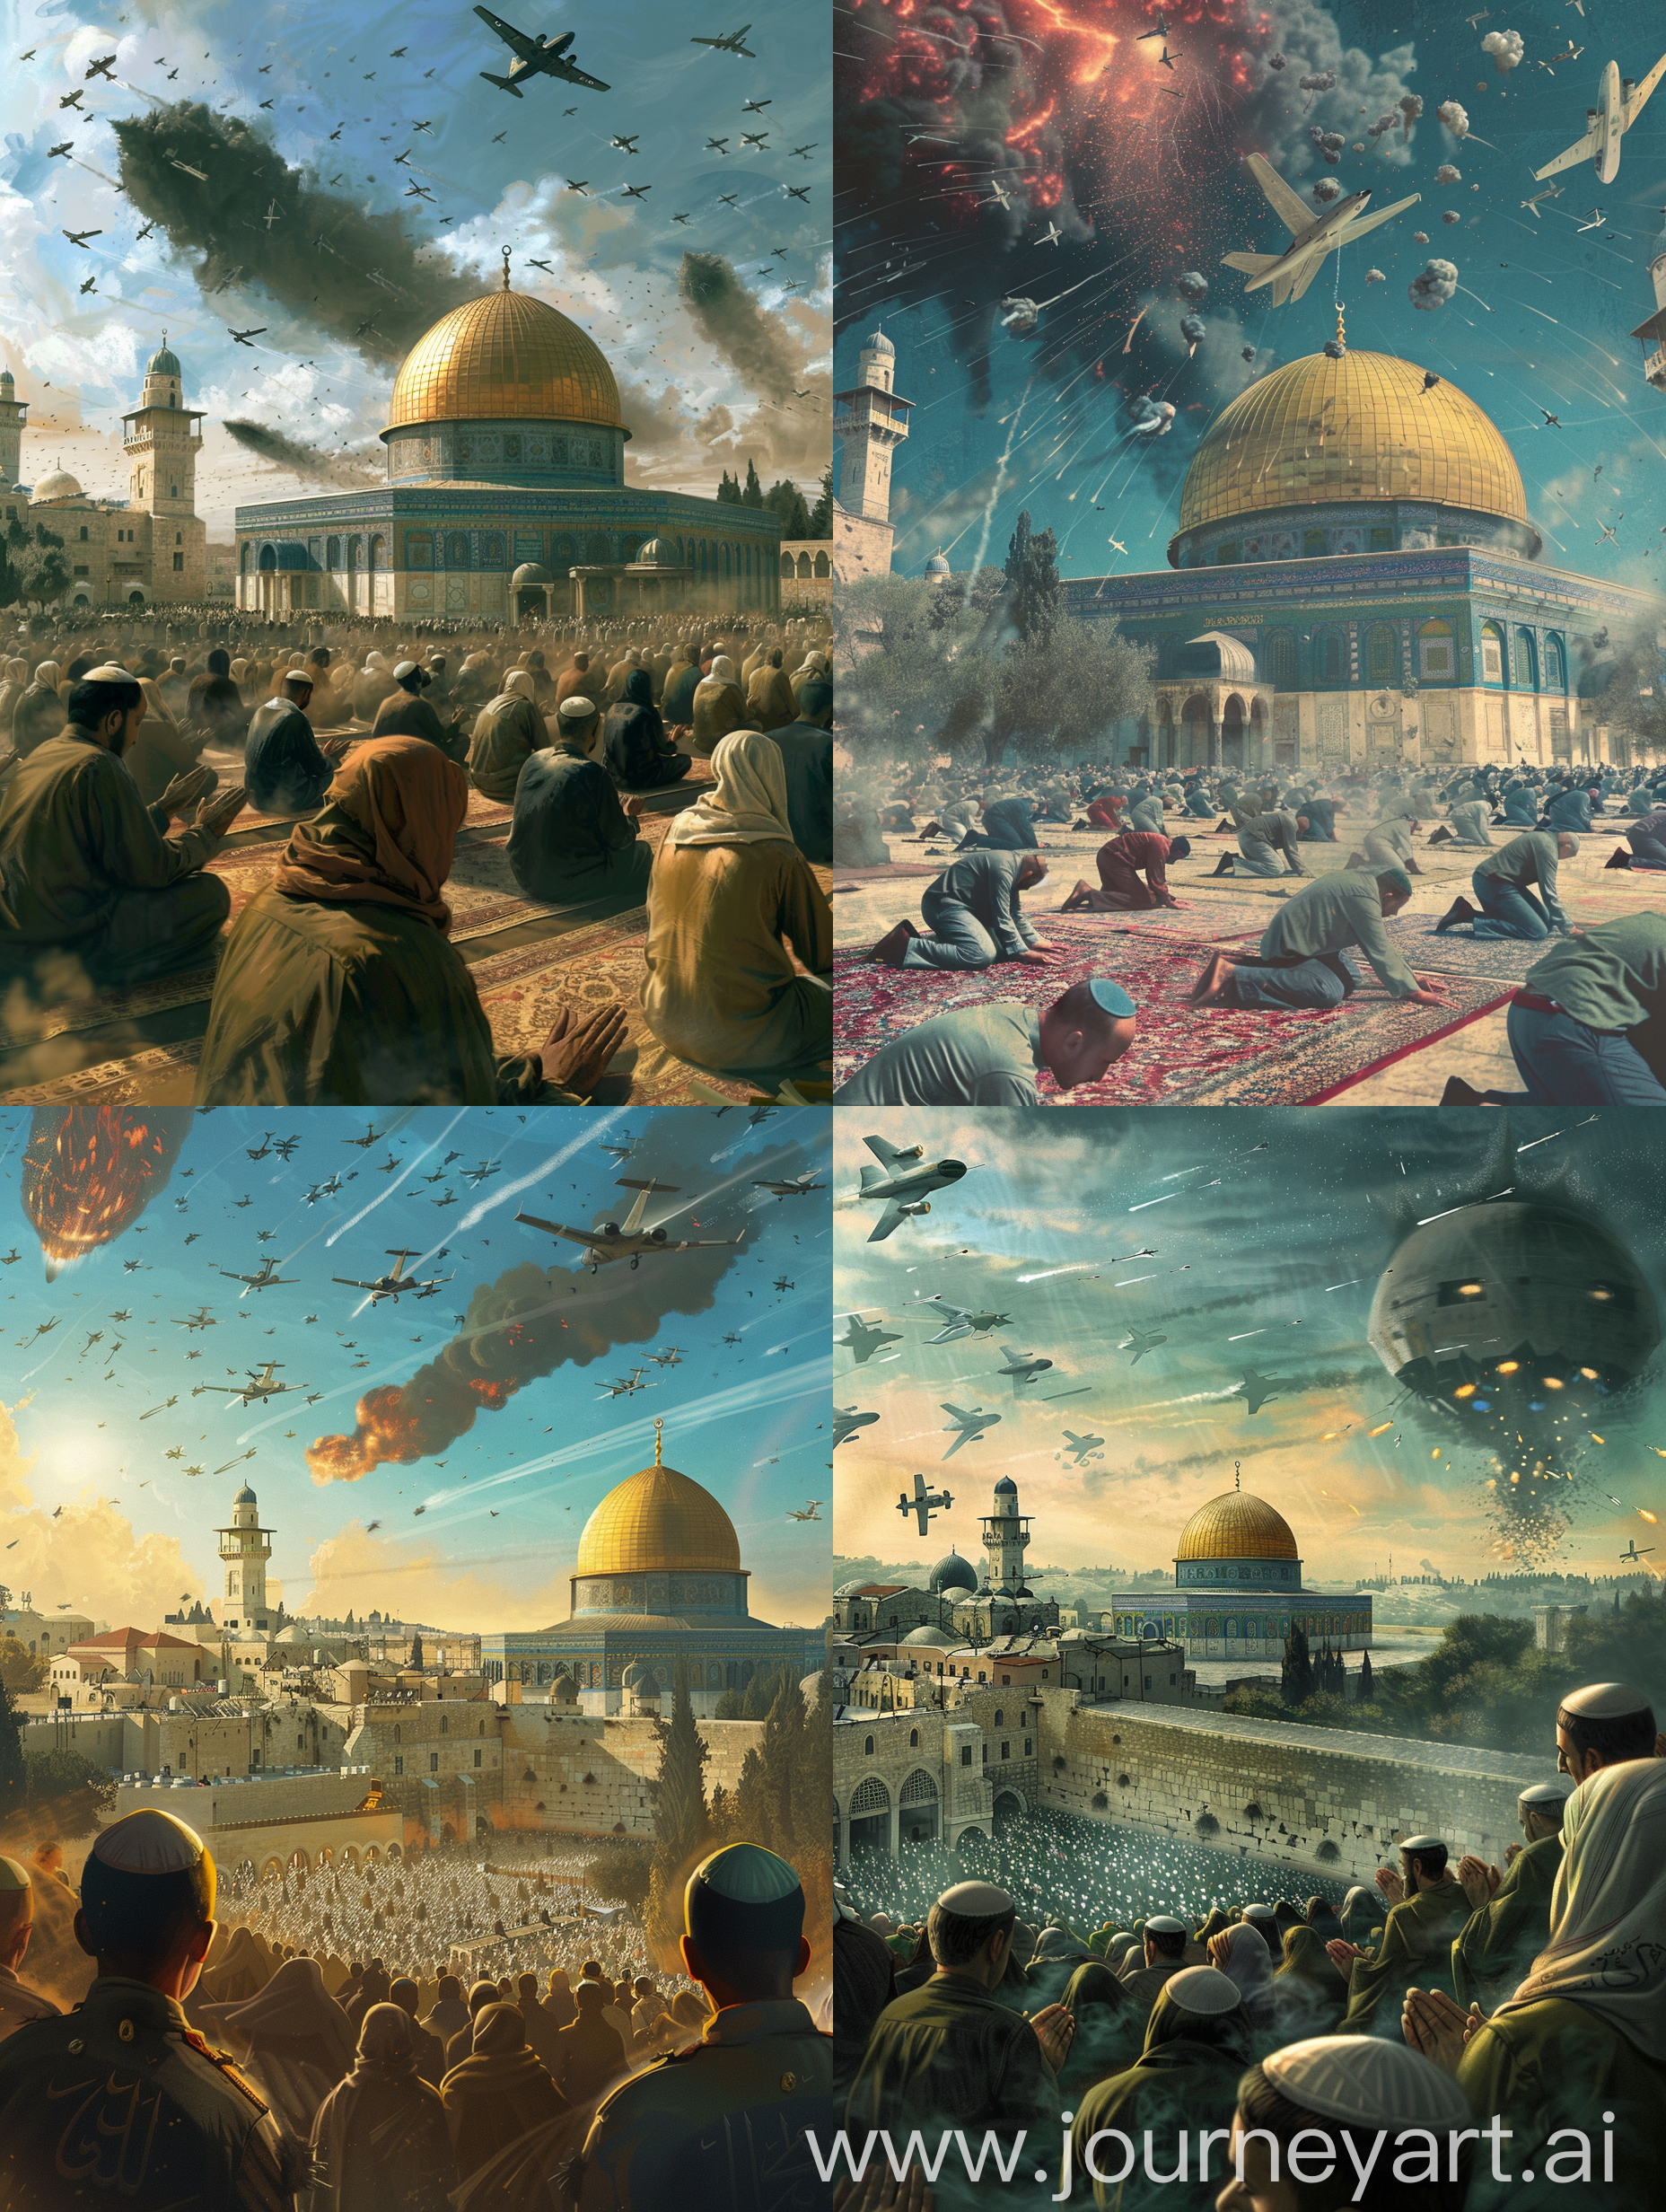 Show Muslims praying, in a mystical and spiritual atmosphere, with spirits flying into the sky, and planes dropping 
, with the Al-Aqsa Mosque in Jerusalem in the background.